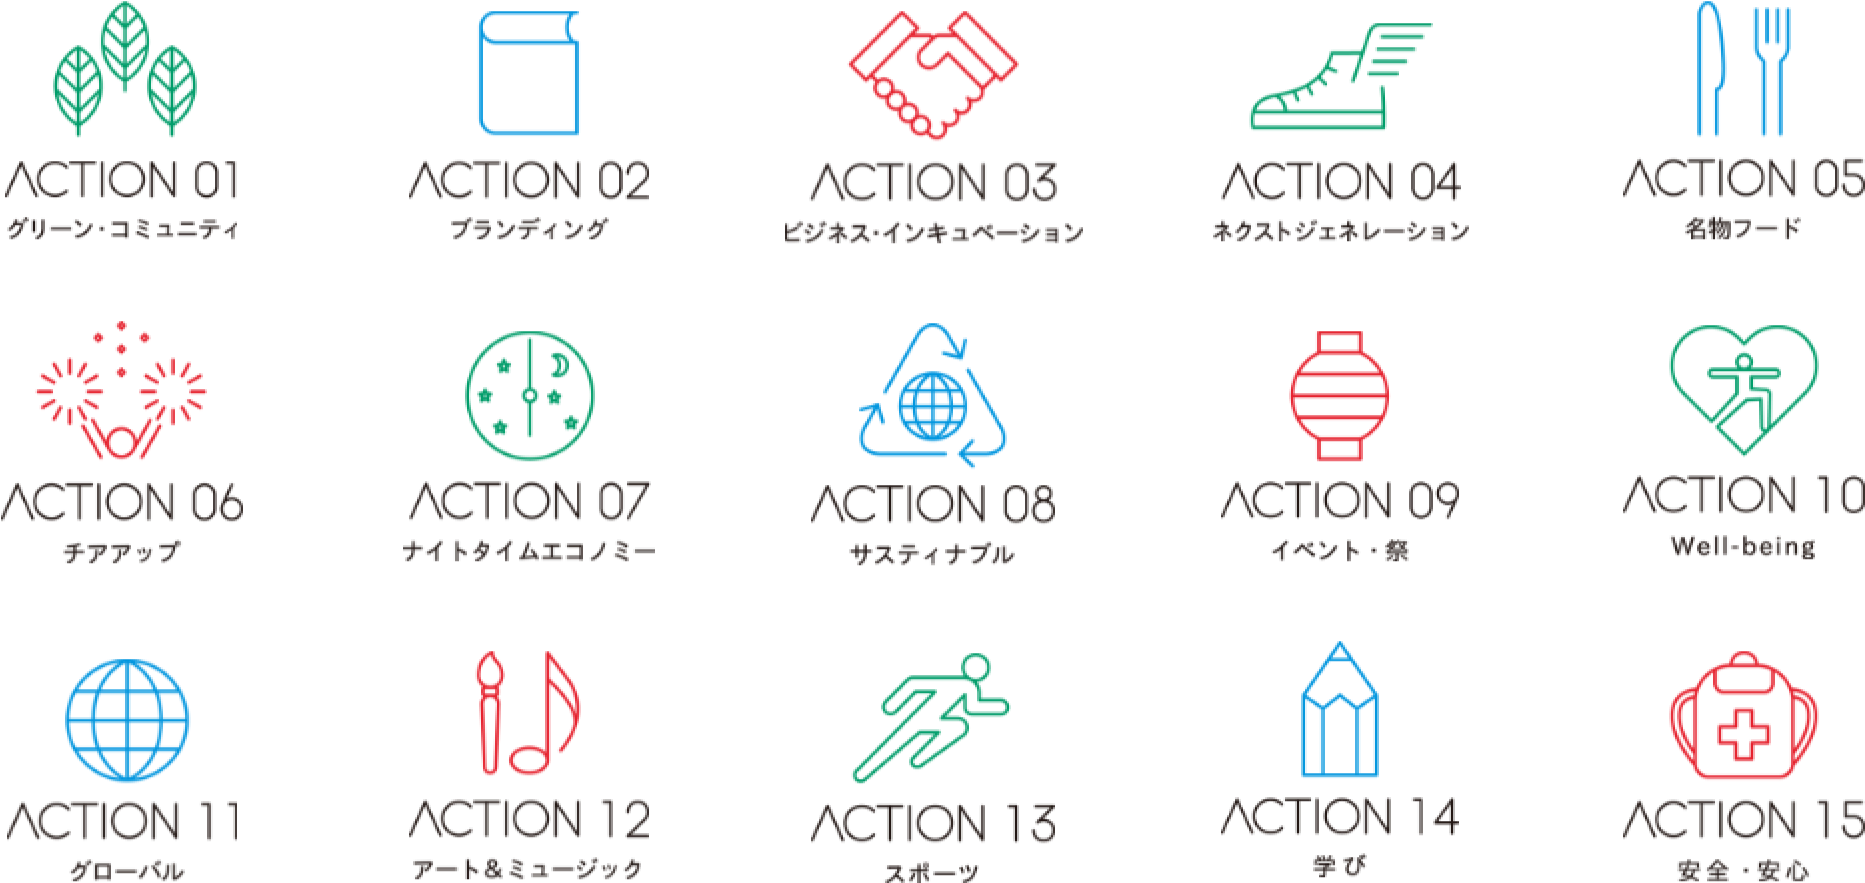 action theme image